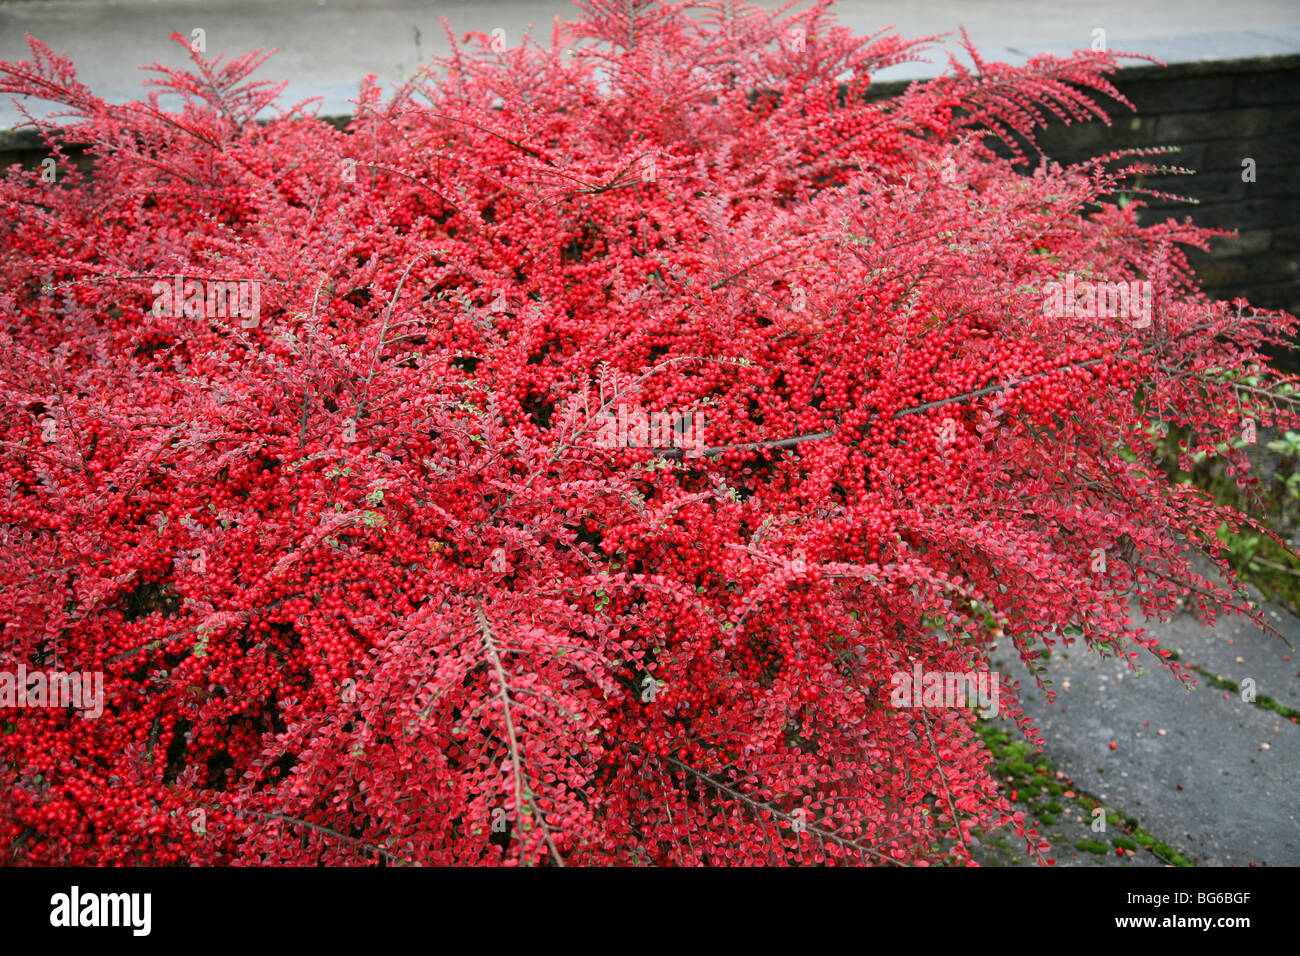 A Cotoneaster bush covered in red berries and leaves in autumn Stock Photo